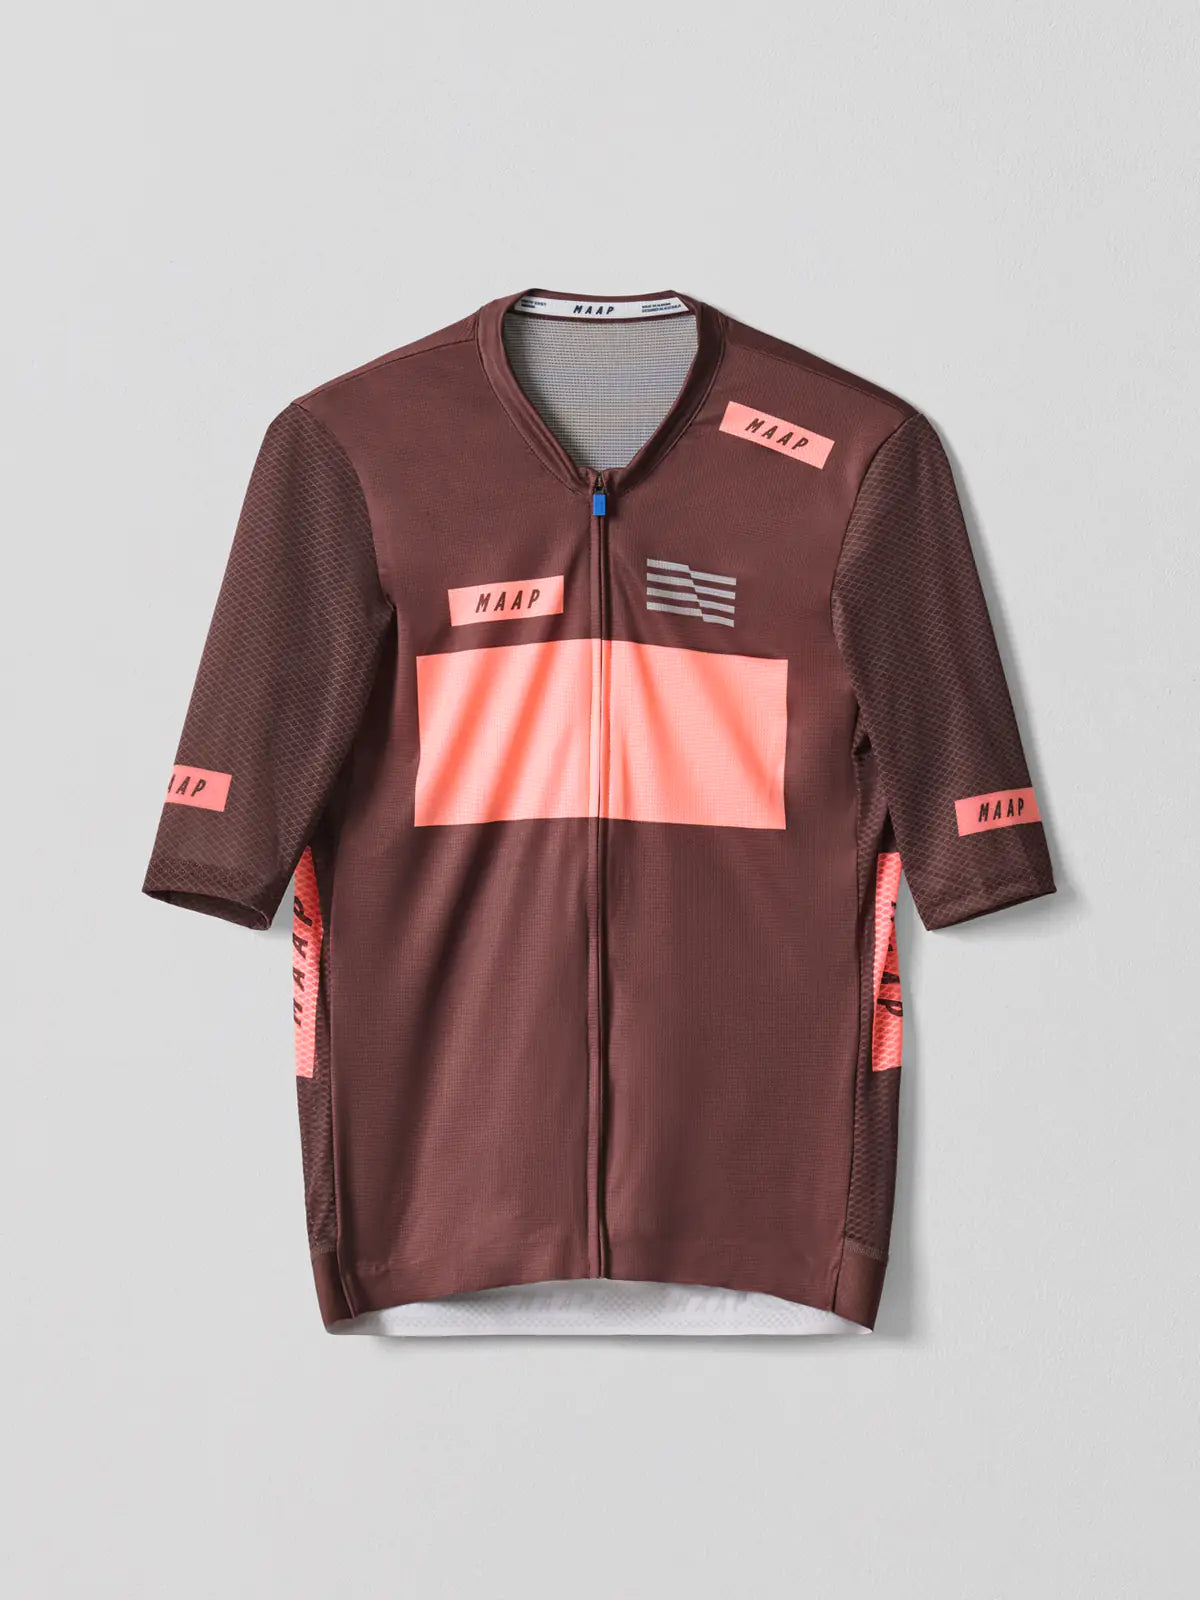 MAAP System Pro Air Jersey Muscat メンズ サイクルジャージ | CYCLISM